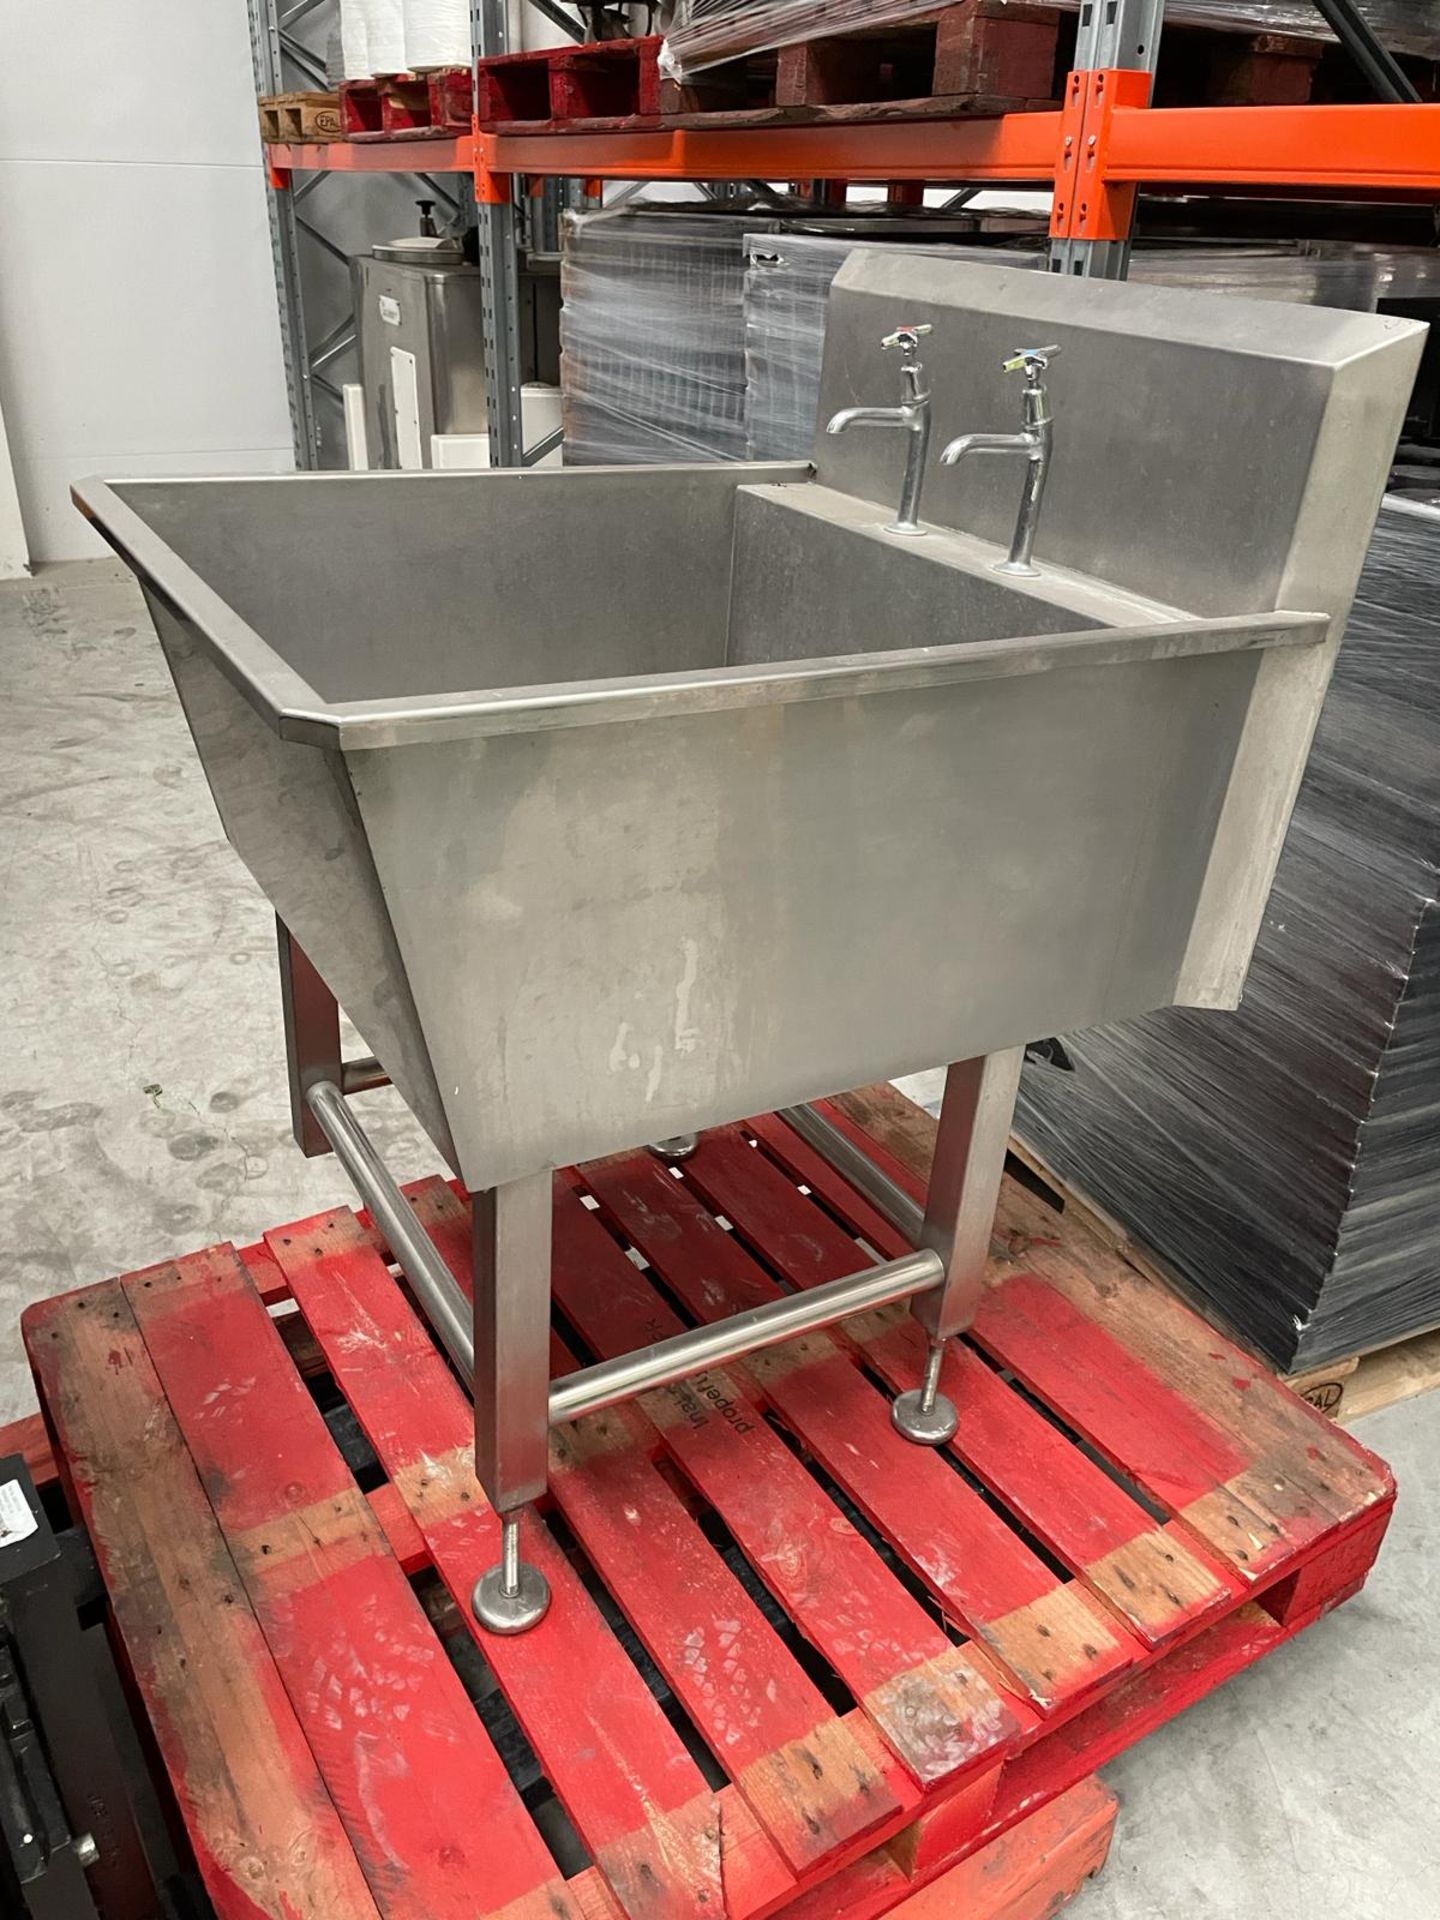 Stainless Steel Sink . Approx.750 x 900 x 1100 mm with 200 mm Splashback 450 deep. Missing leg. - Image 2 of 4